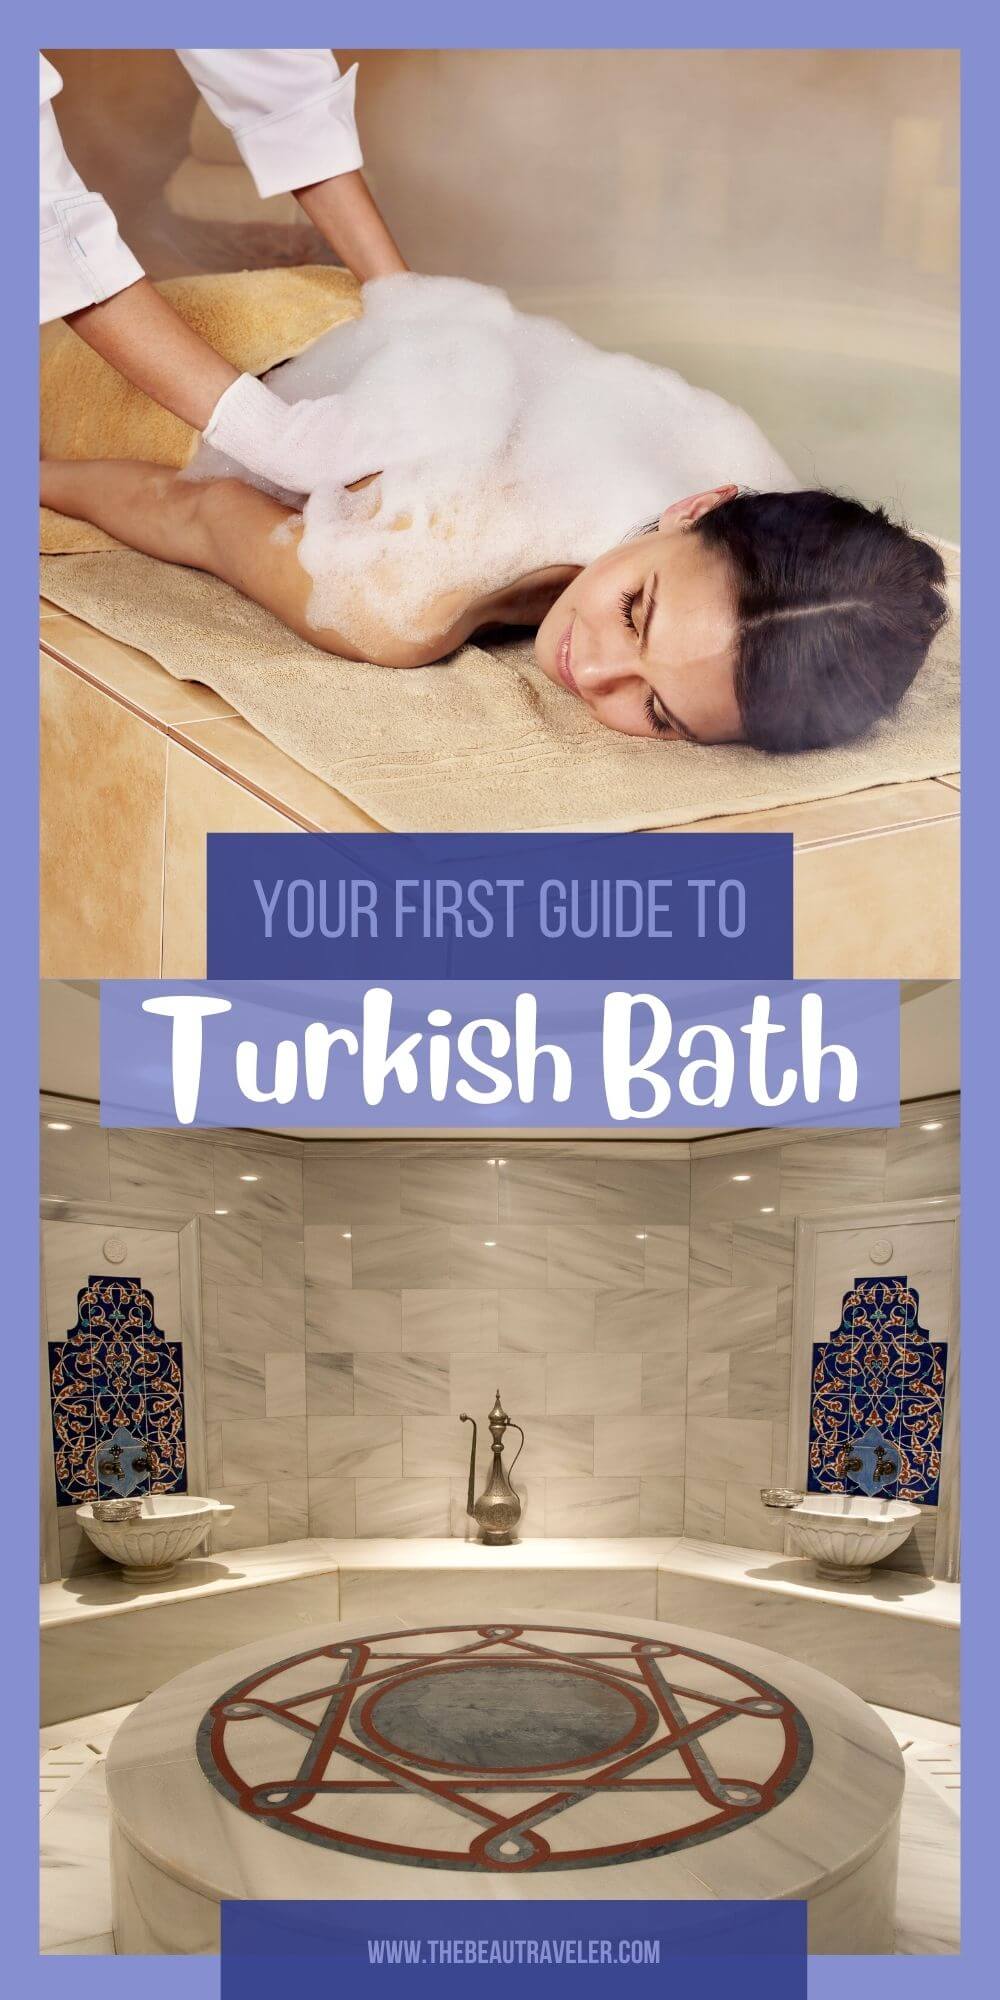 Your First Guide to Turkish Bath